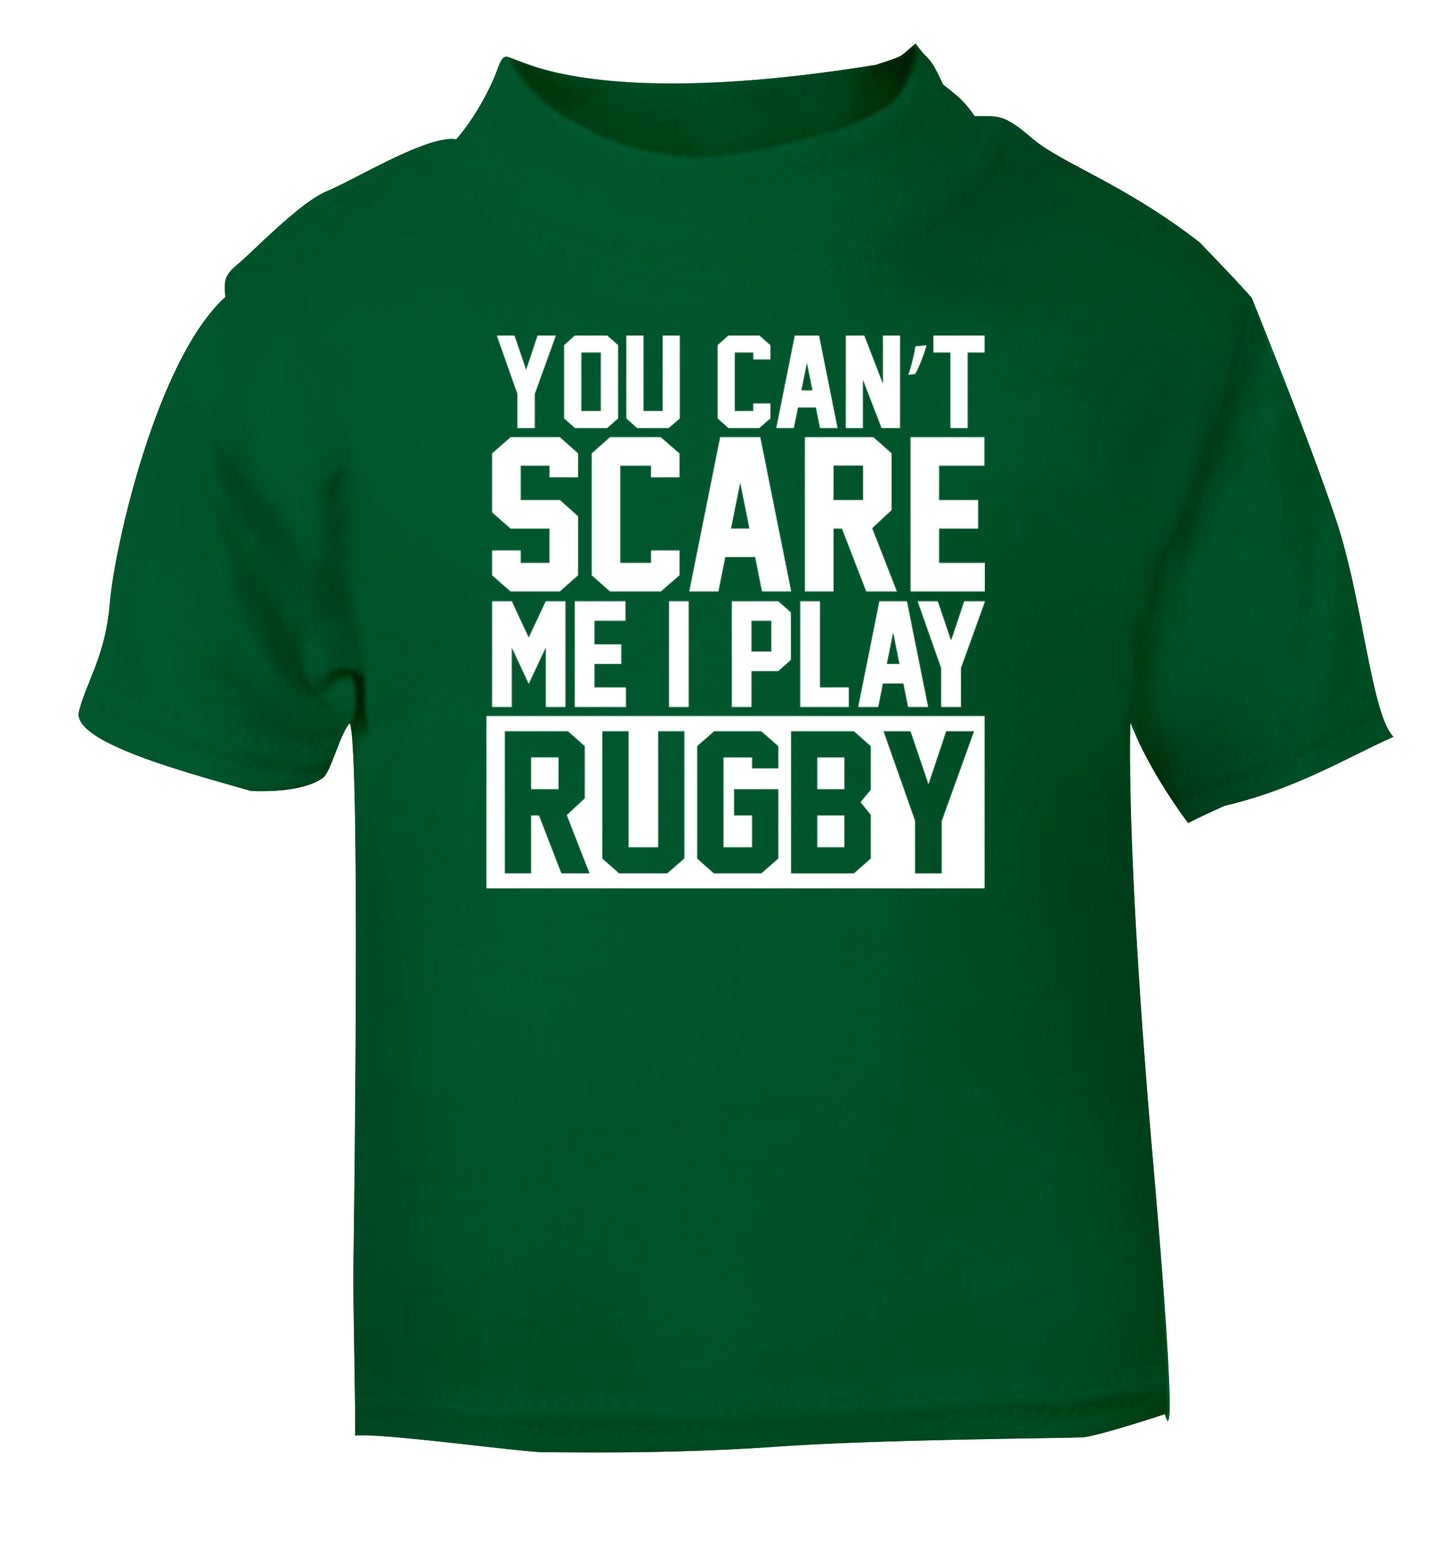 You can't scare me I play rugby green Baby Toddler Tshirt 2 Years